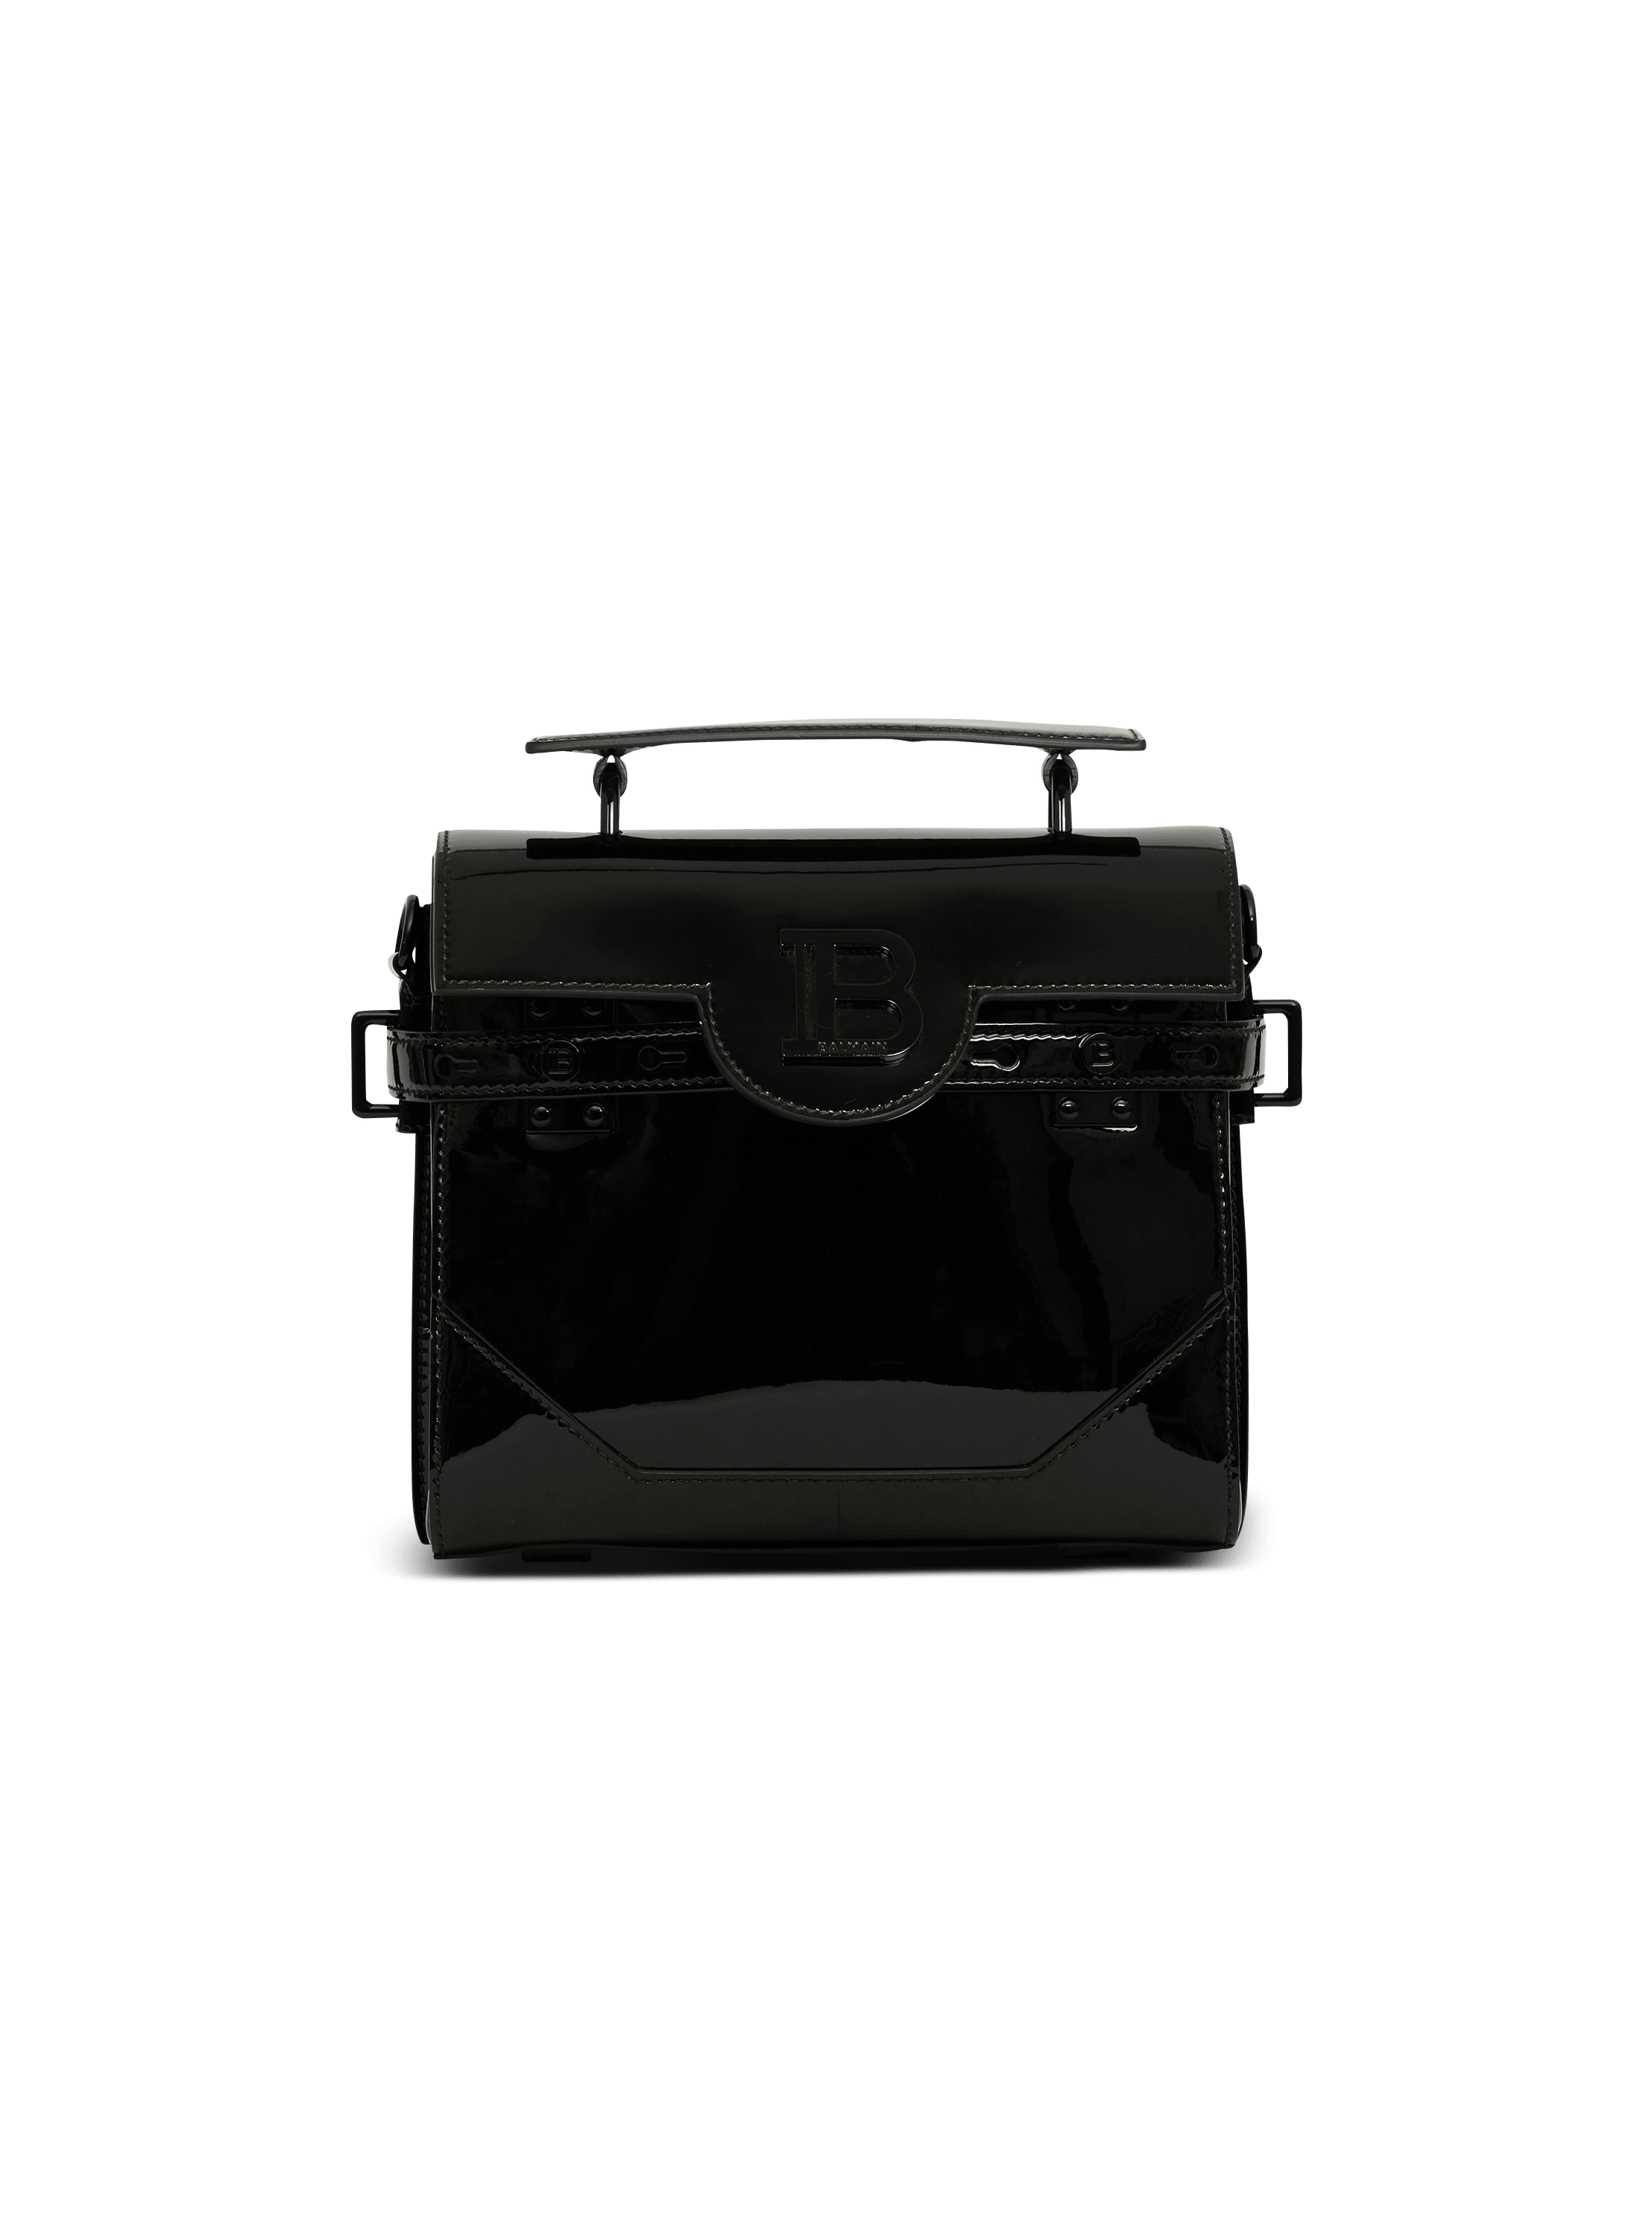 B-Buzz 23 patent leather bag